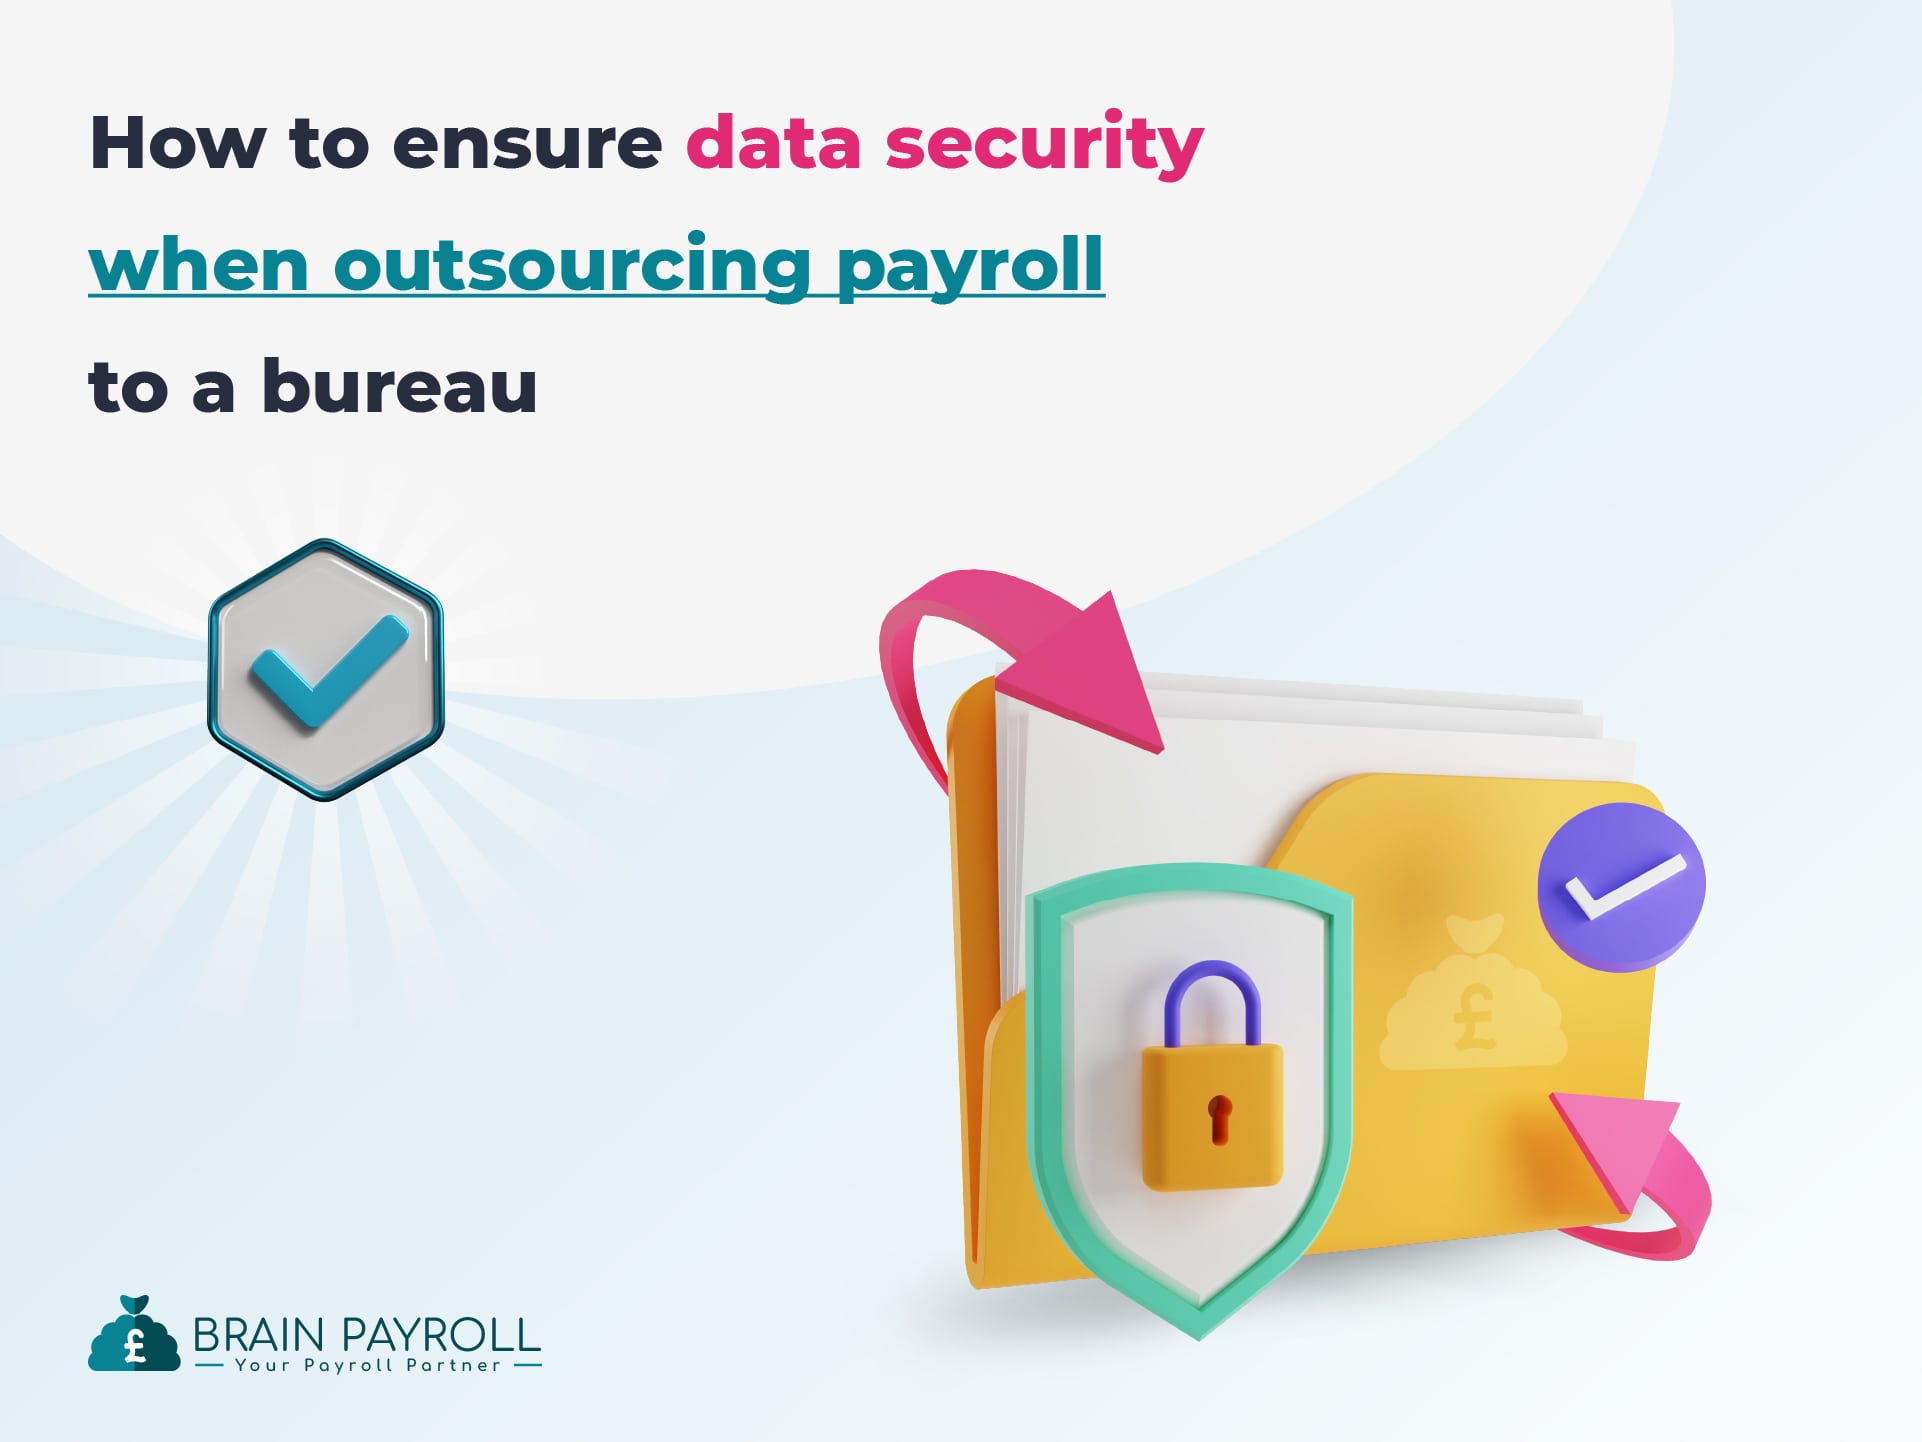 How to Ensure Data Security When Outsourcing Payroll to a Bureau